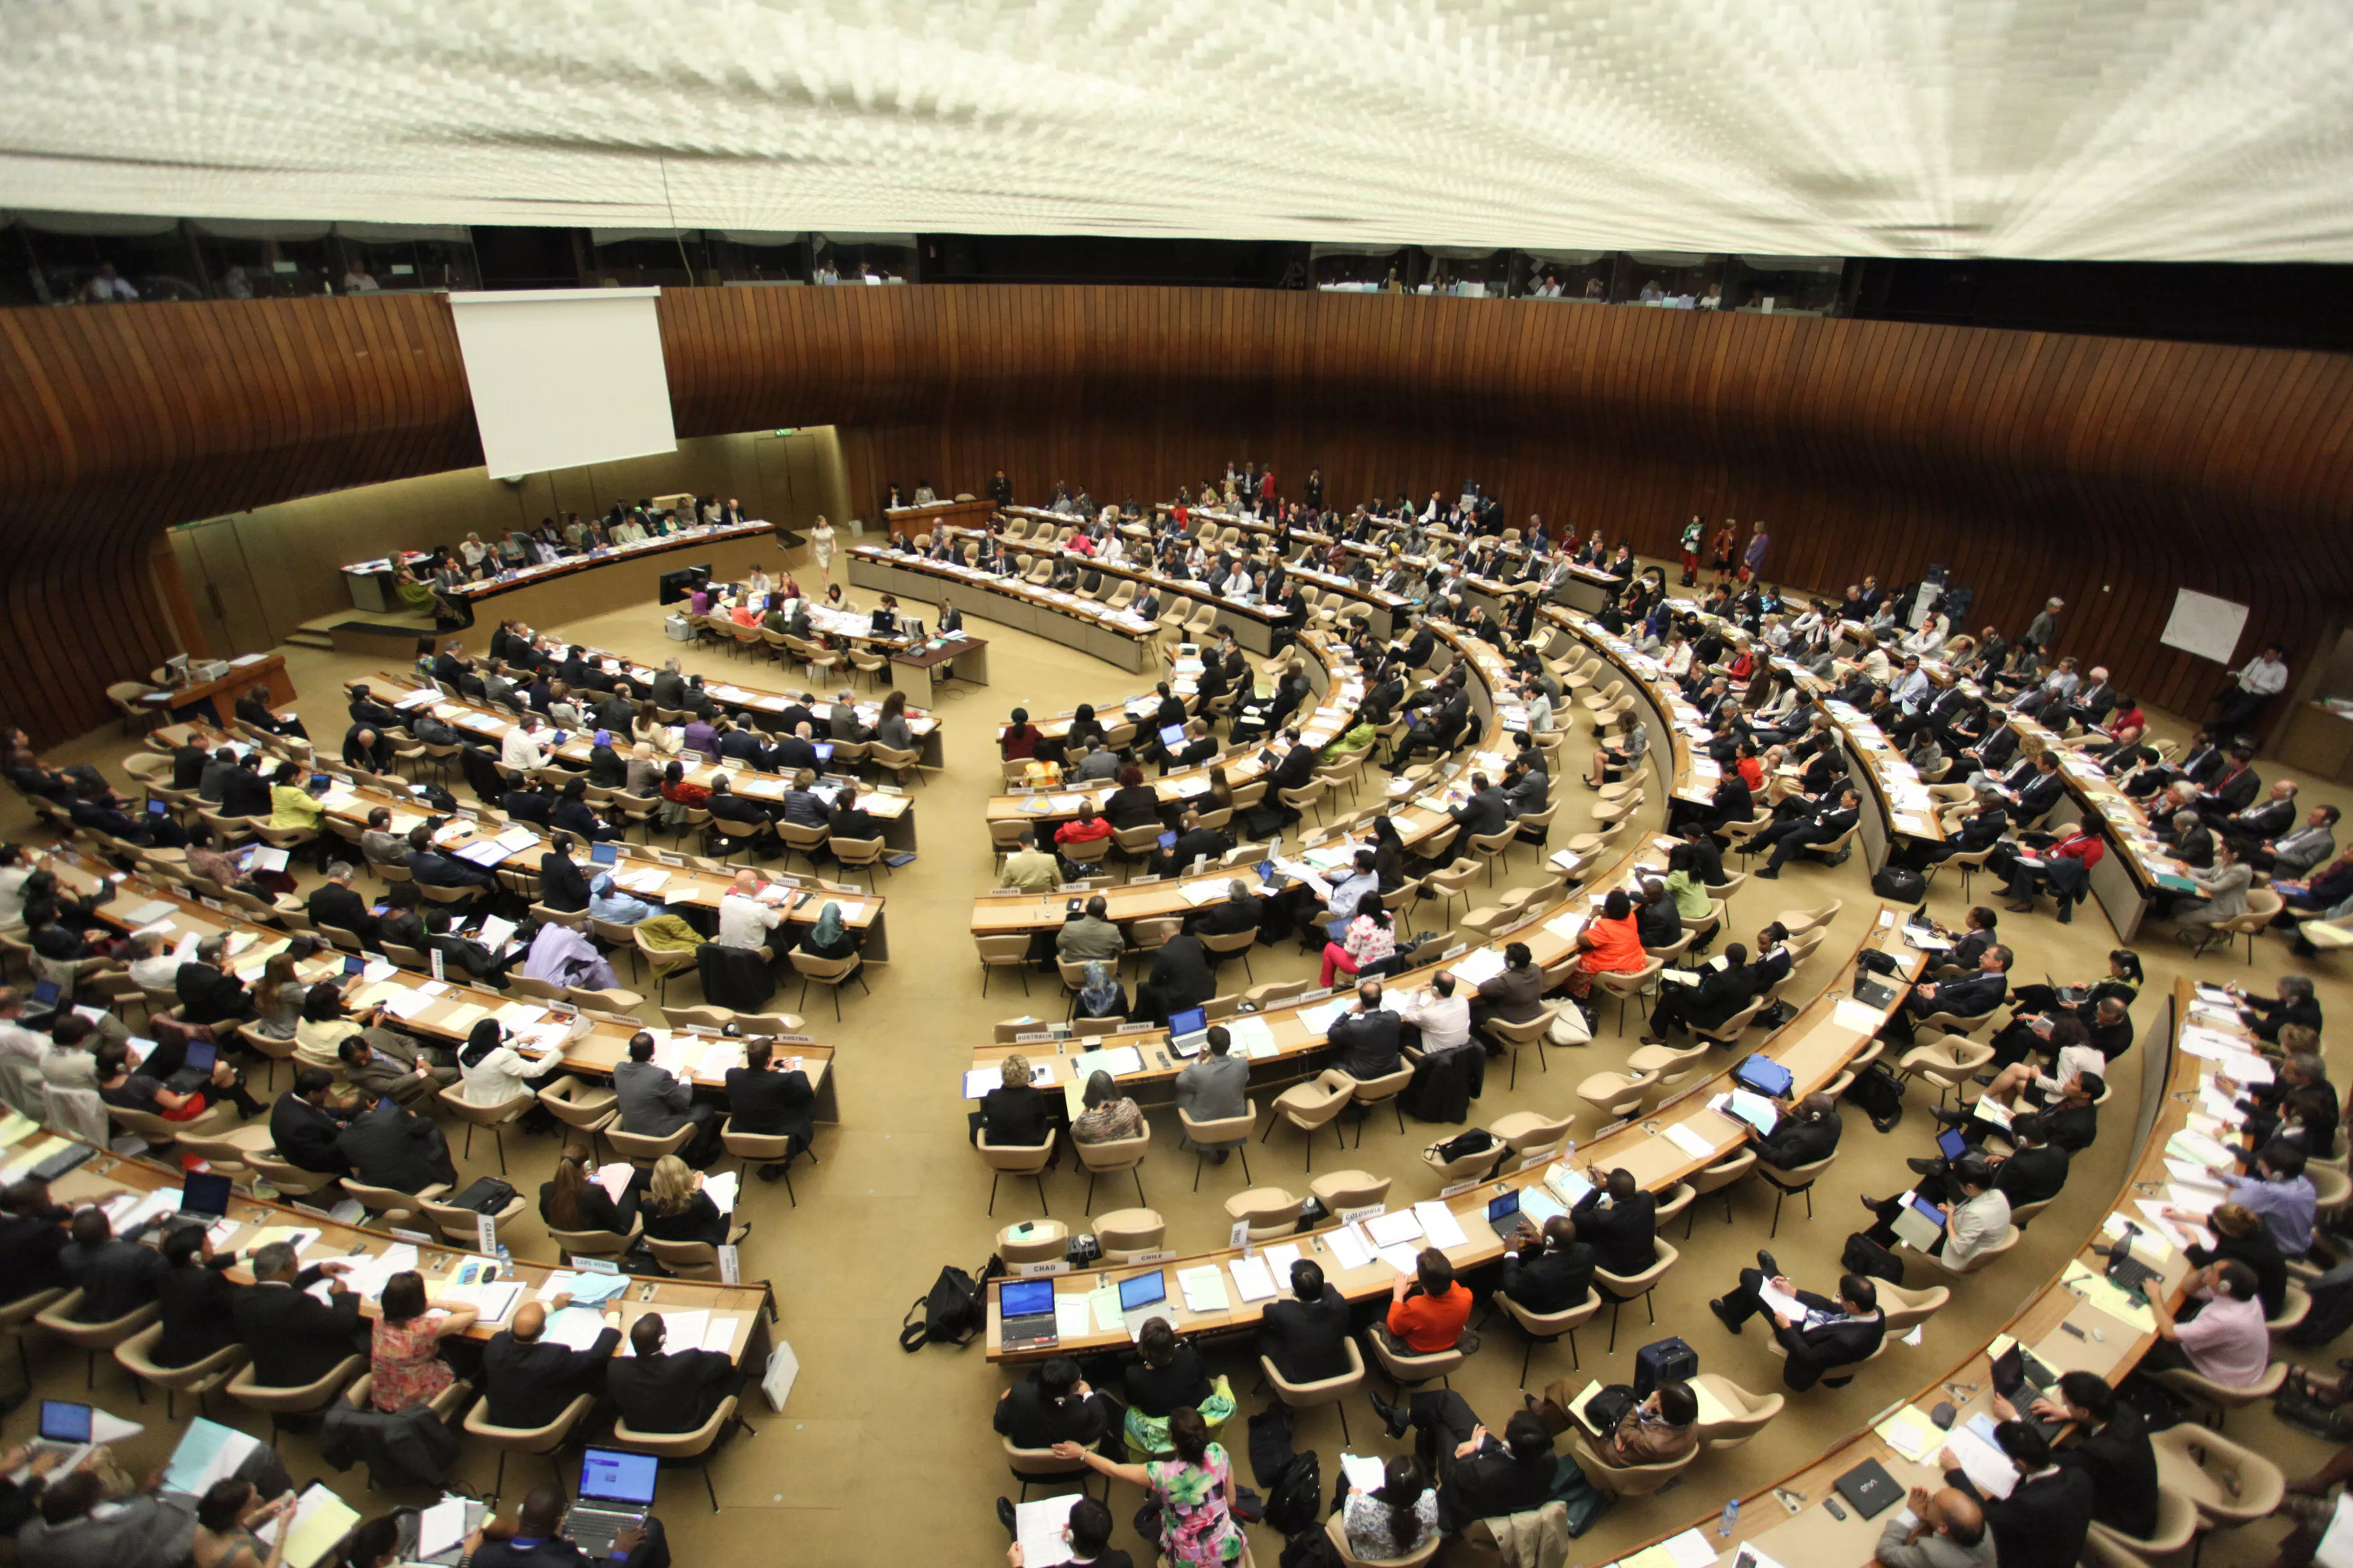 64th World Health Assembly, 2011